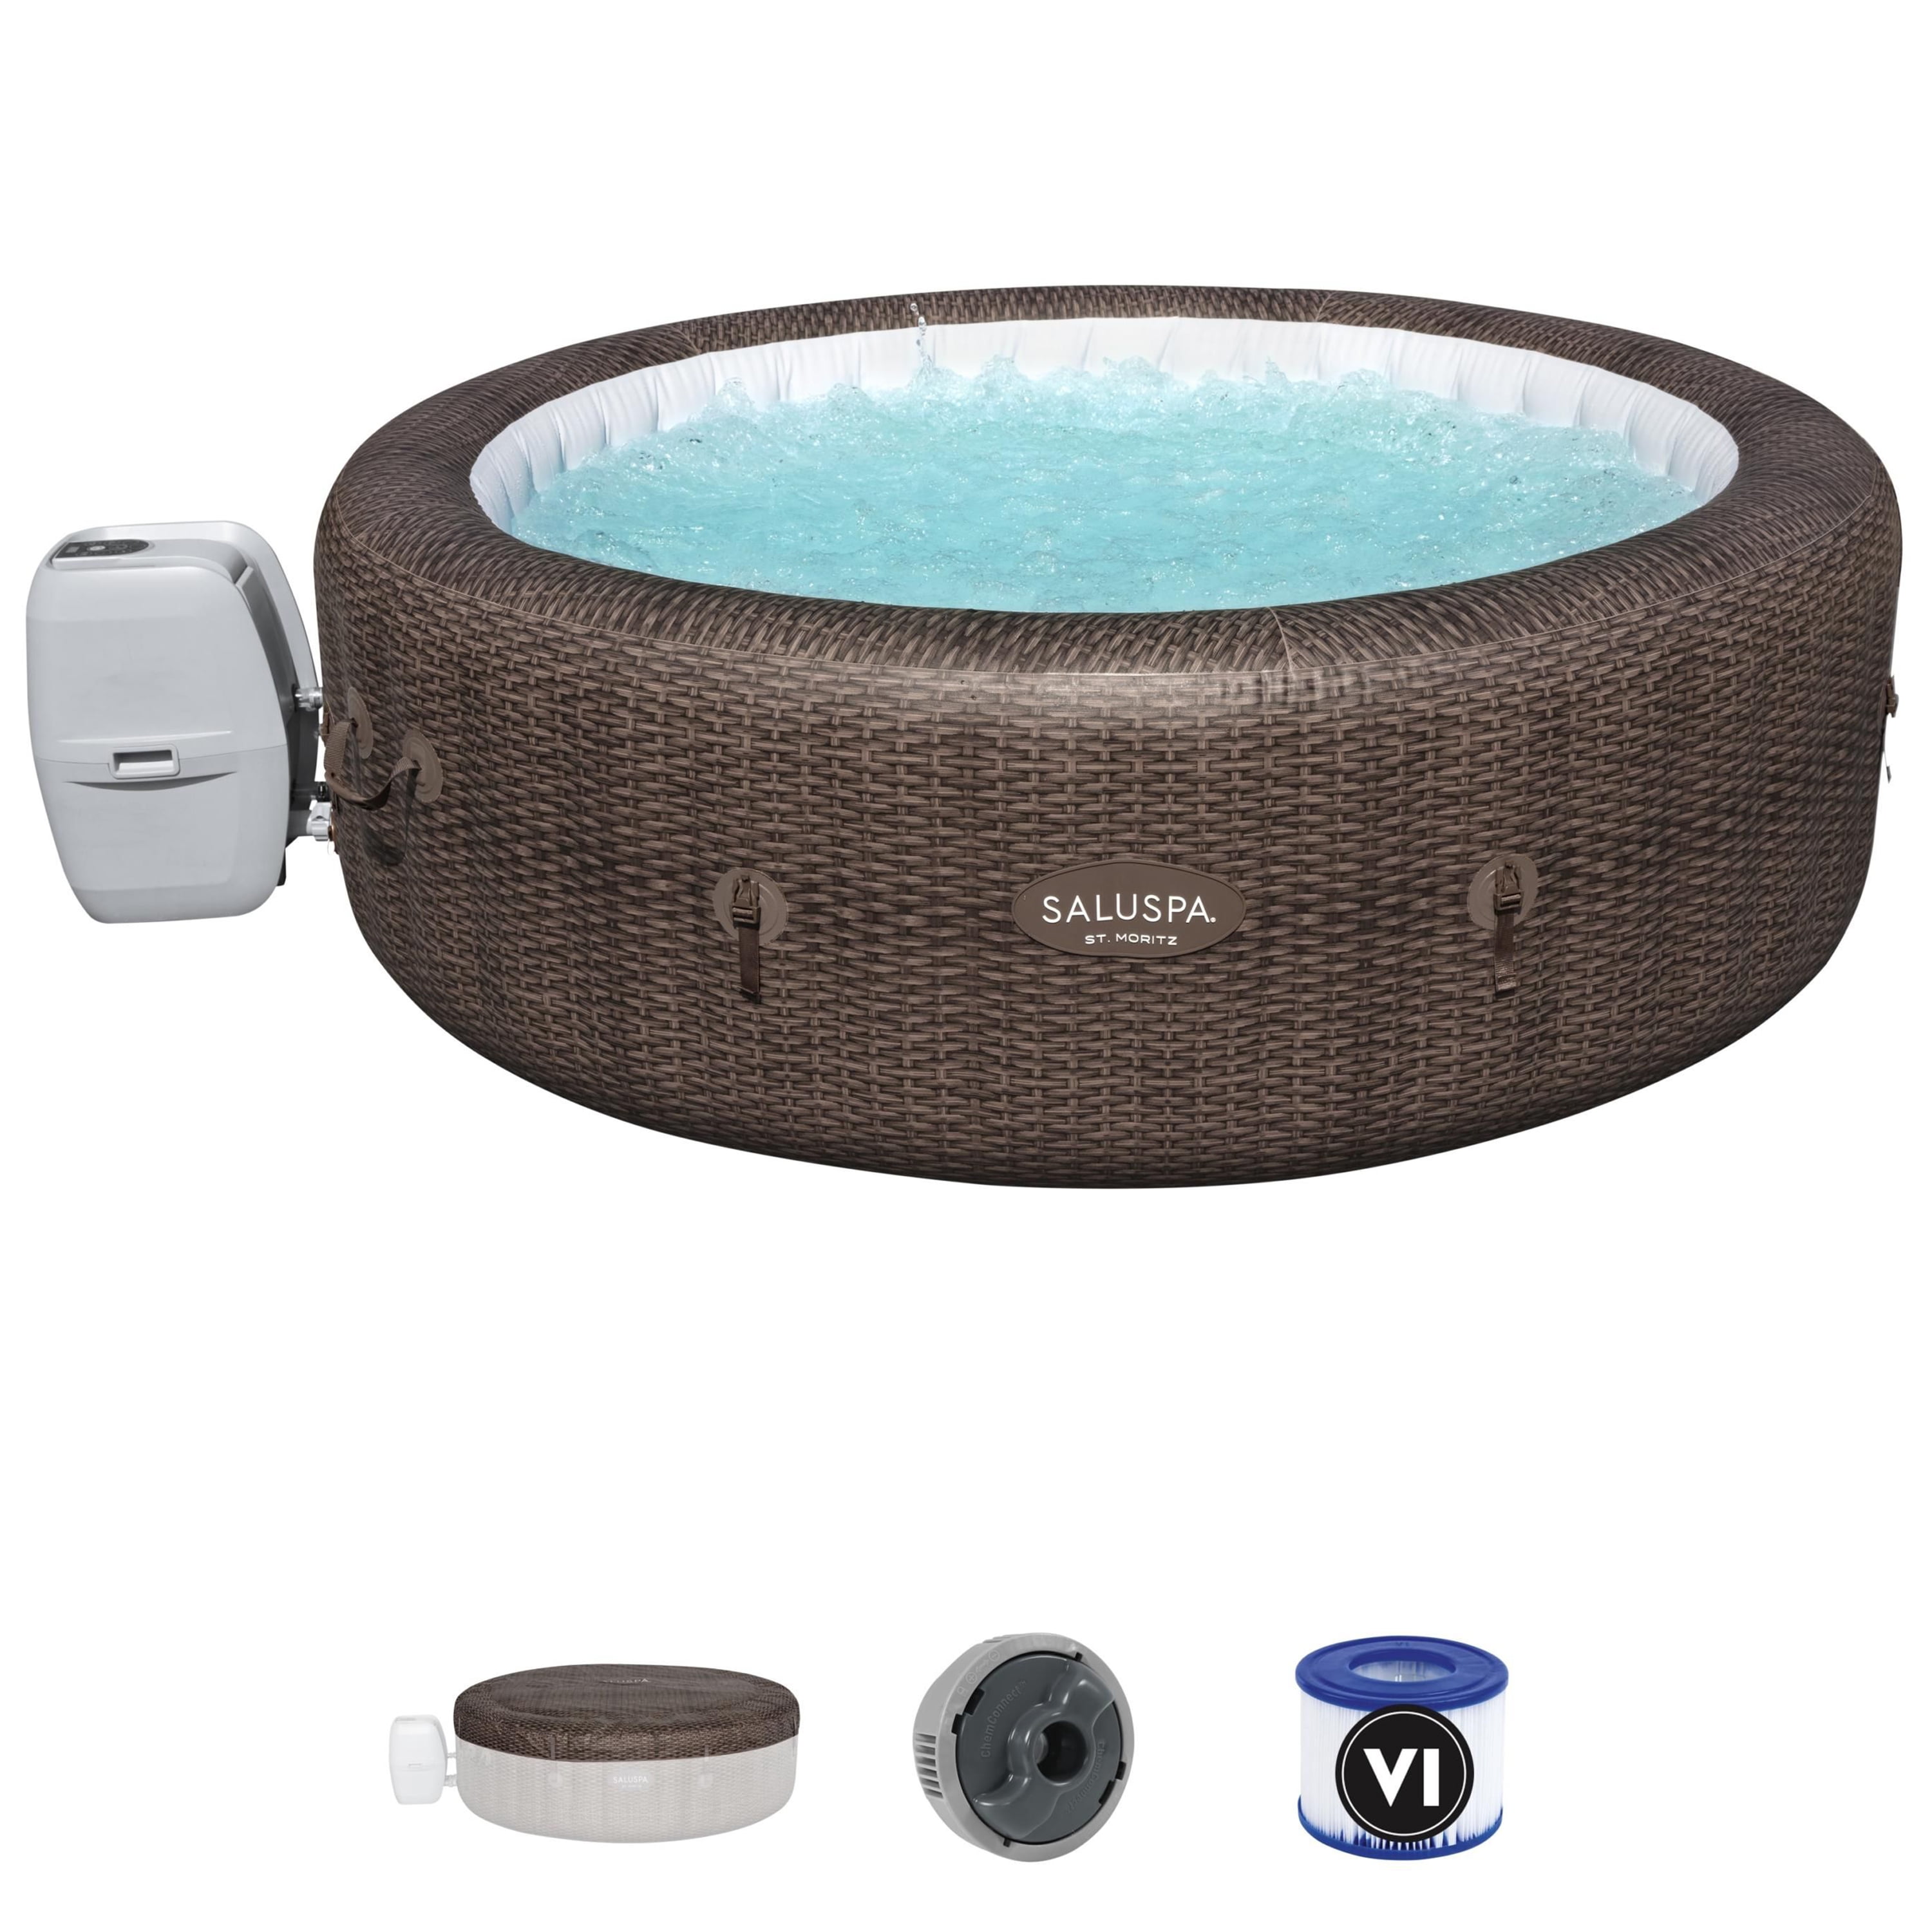 Bestway St. Moritz SaluSpa 2-7 Person Inflatable Hot Tub with 180 AirJets